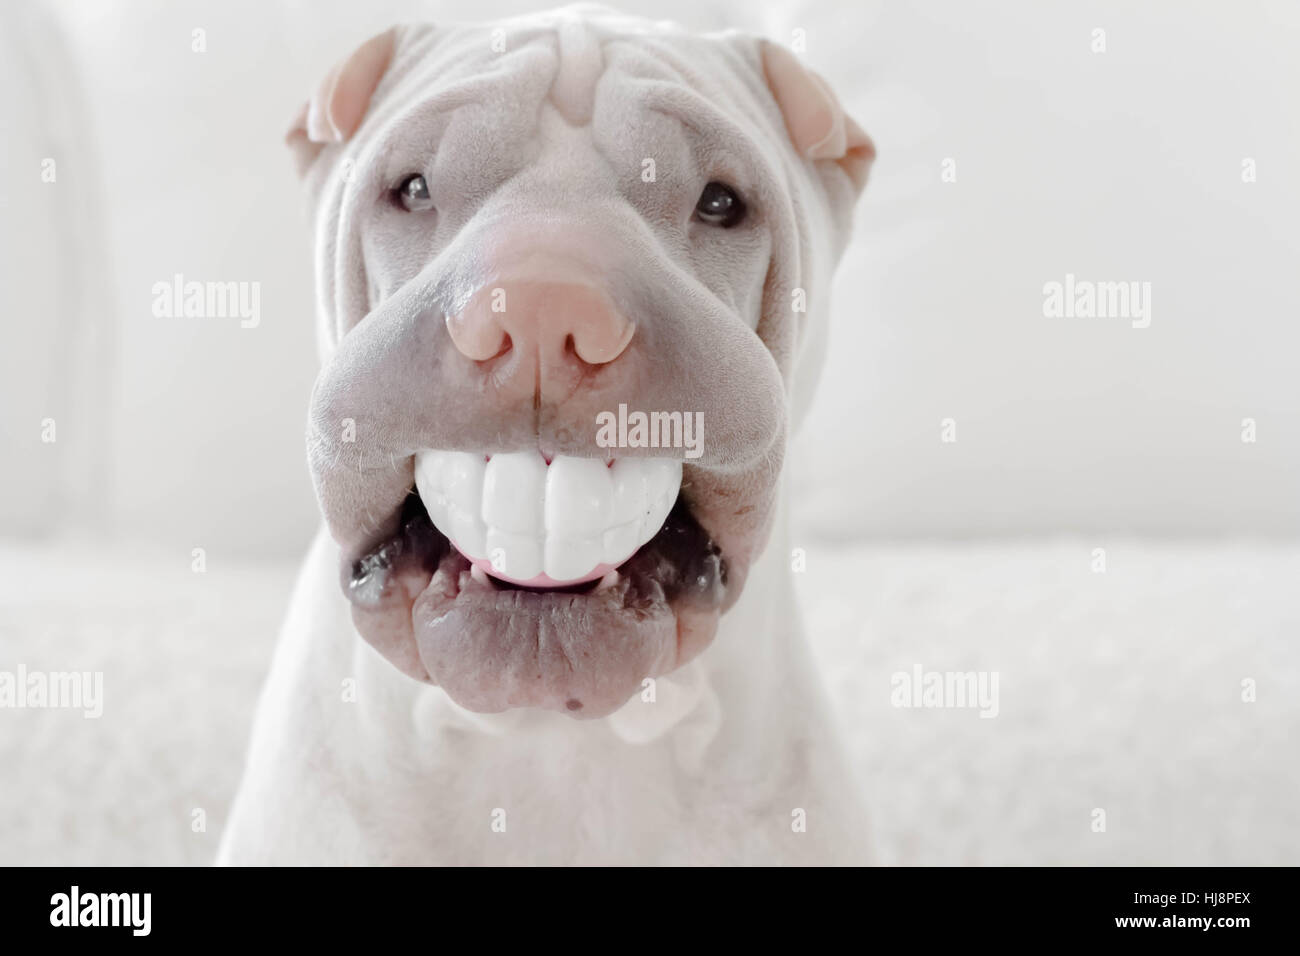 Shar pei dog with a ball in his mouth Stock Photo